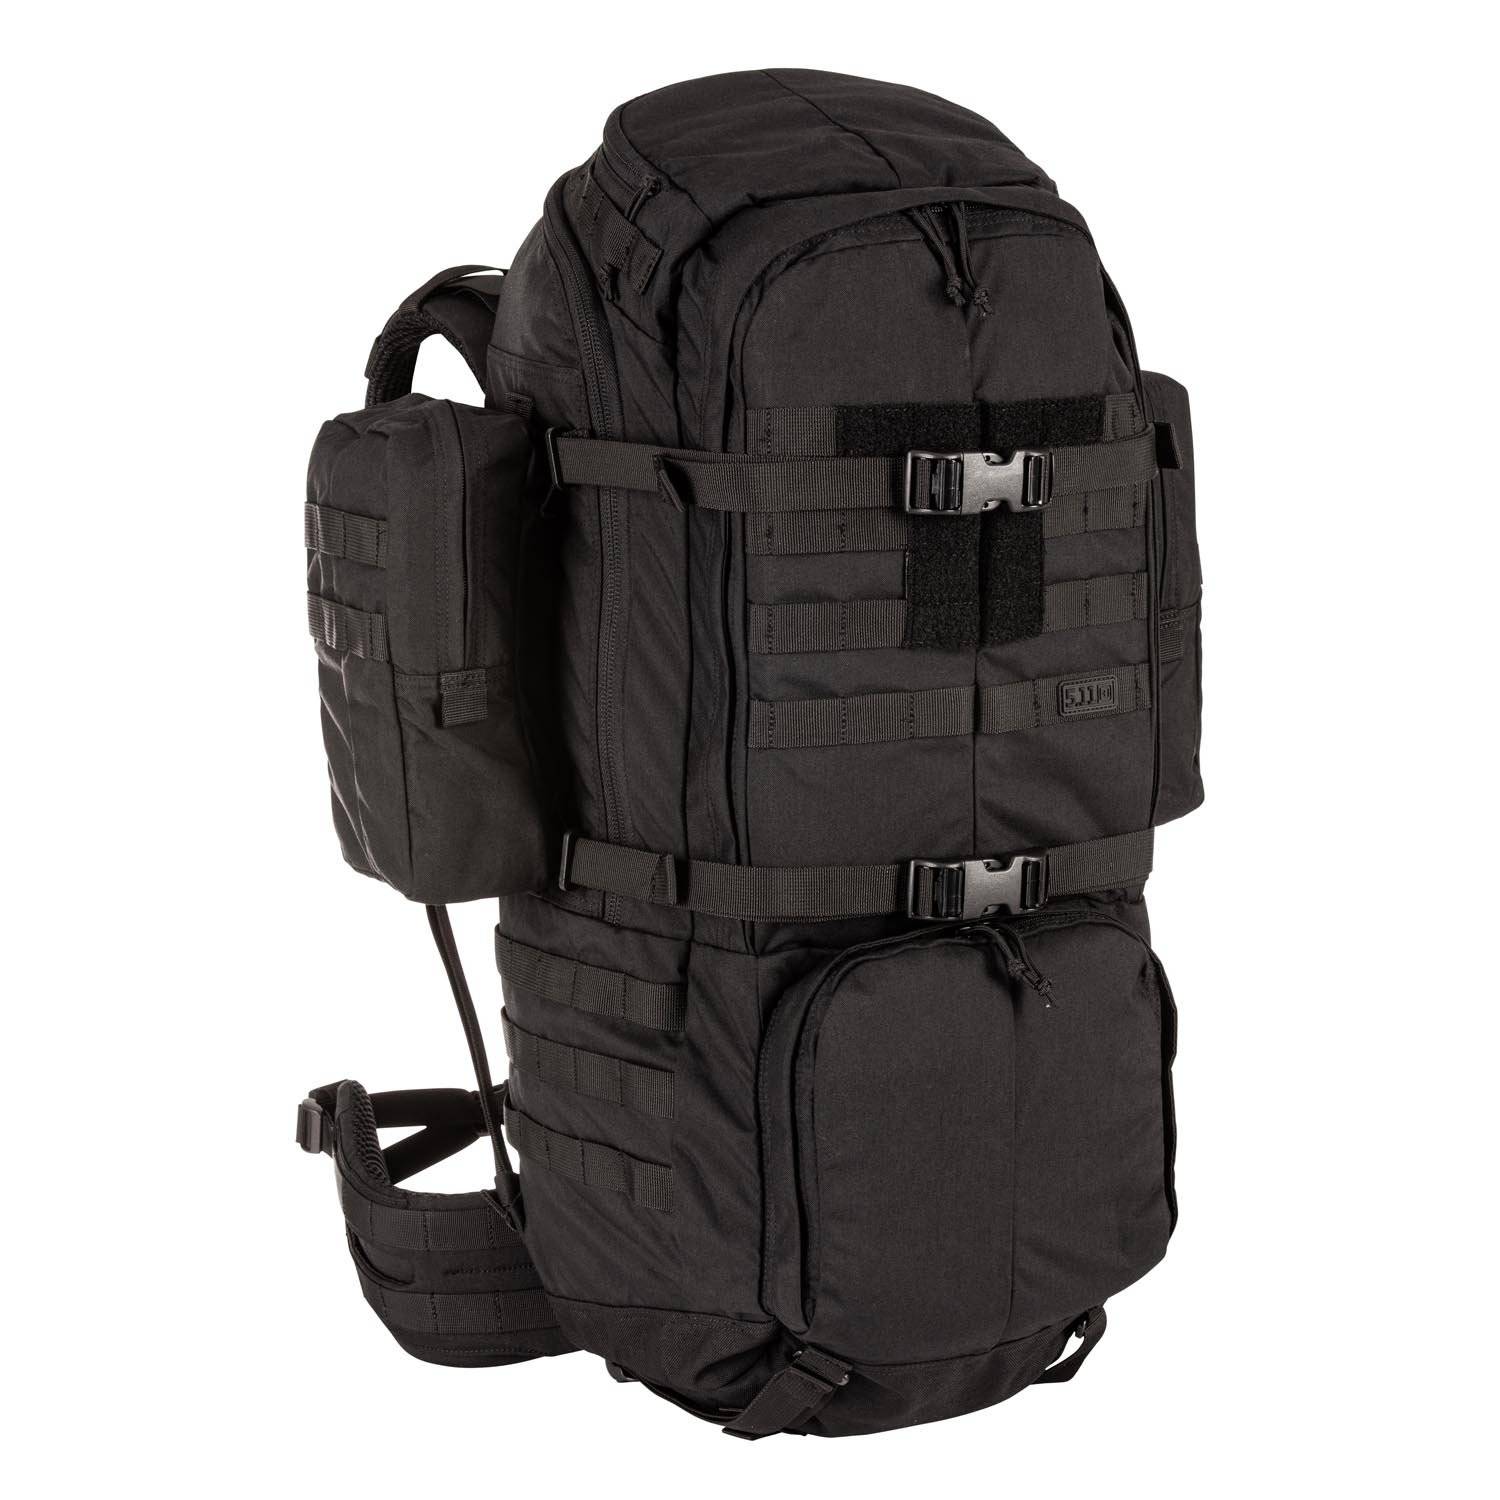 5.11 TACTICAL RUSH 100 BACKPACK 60L